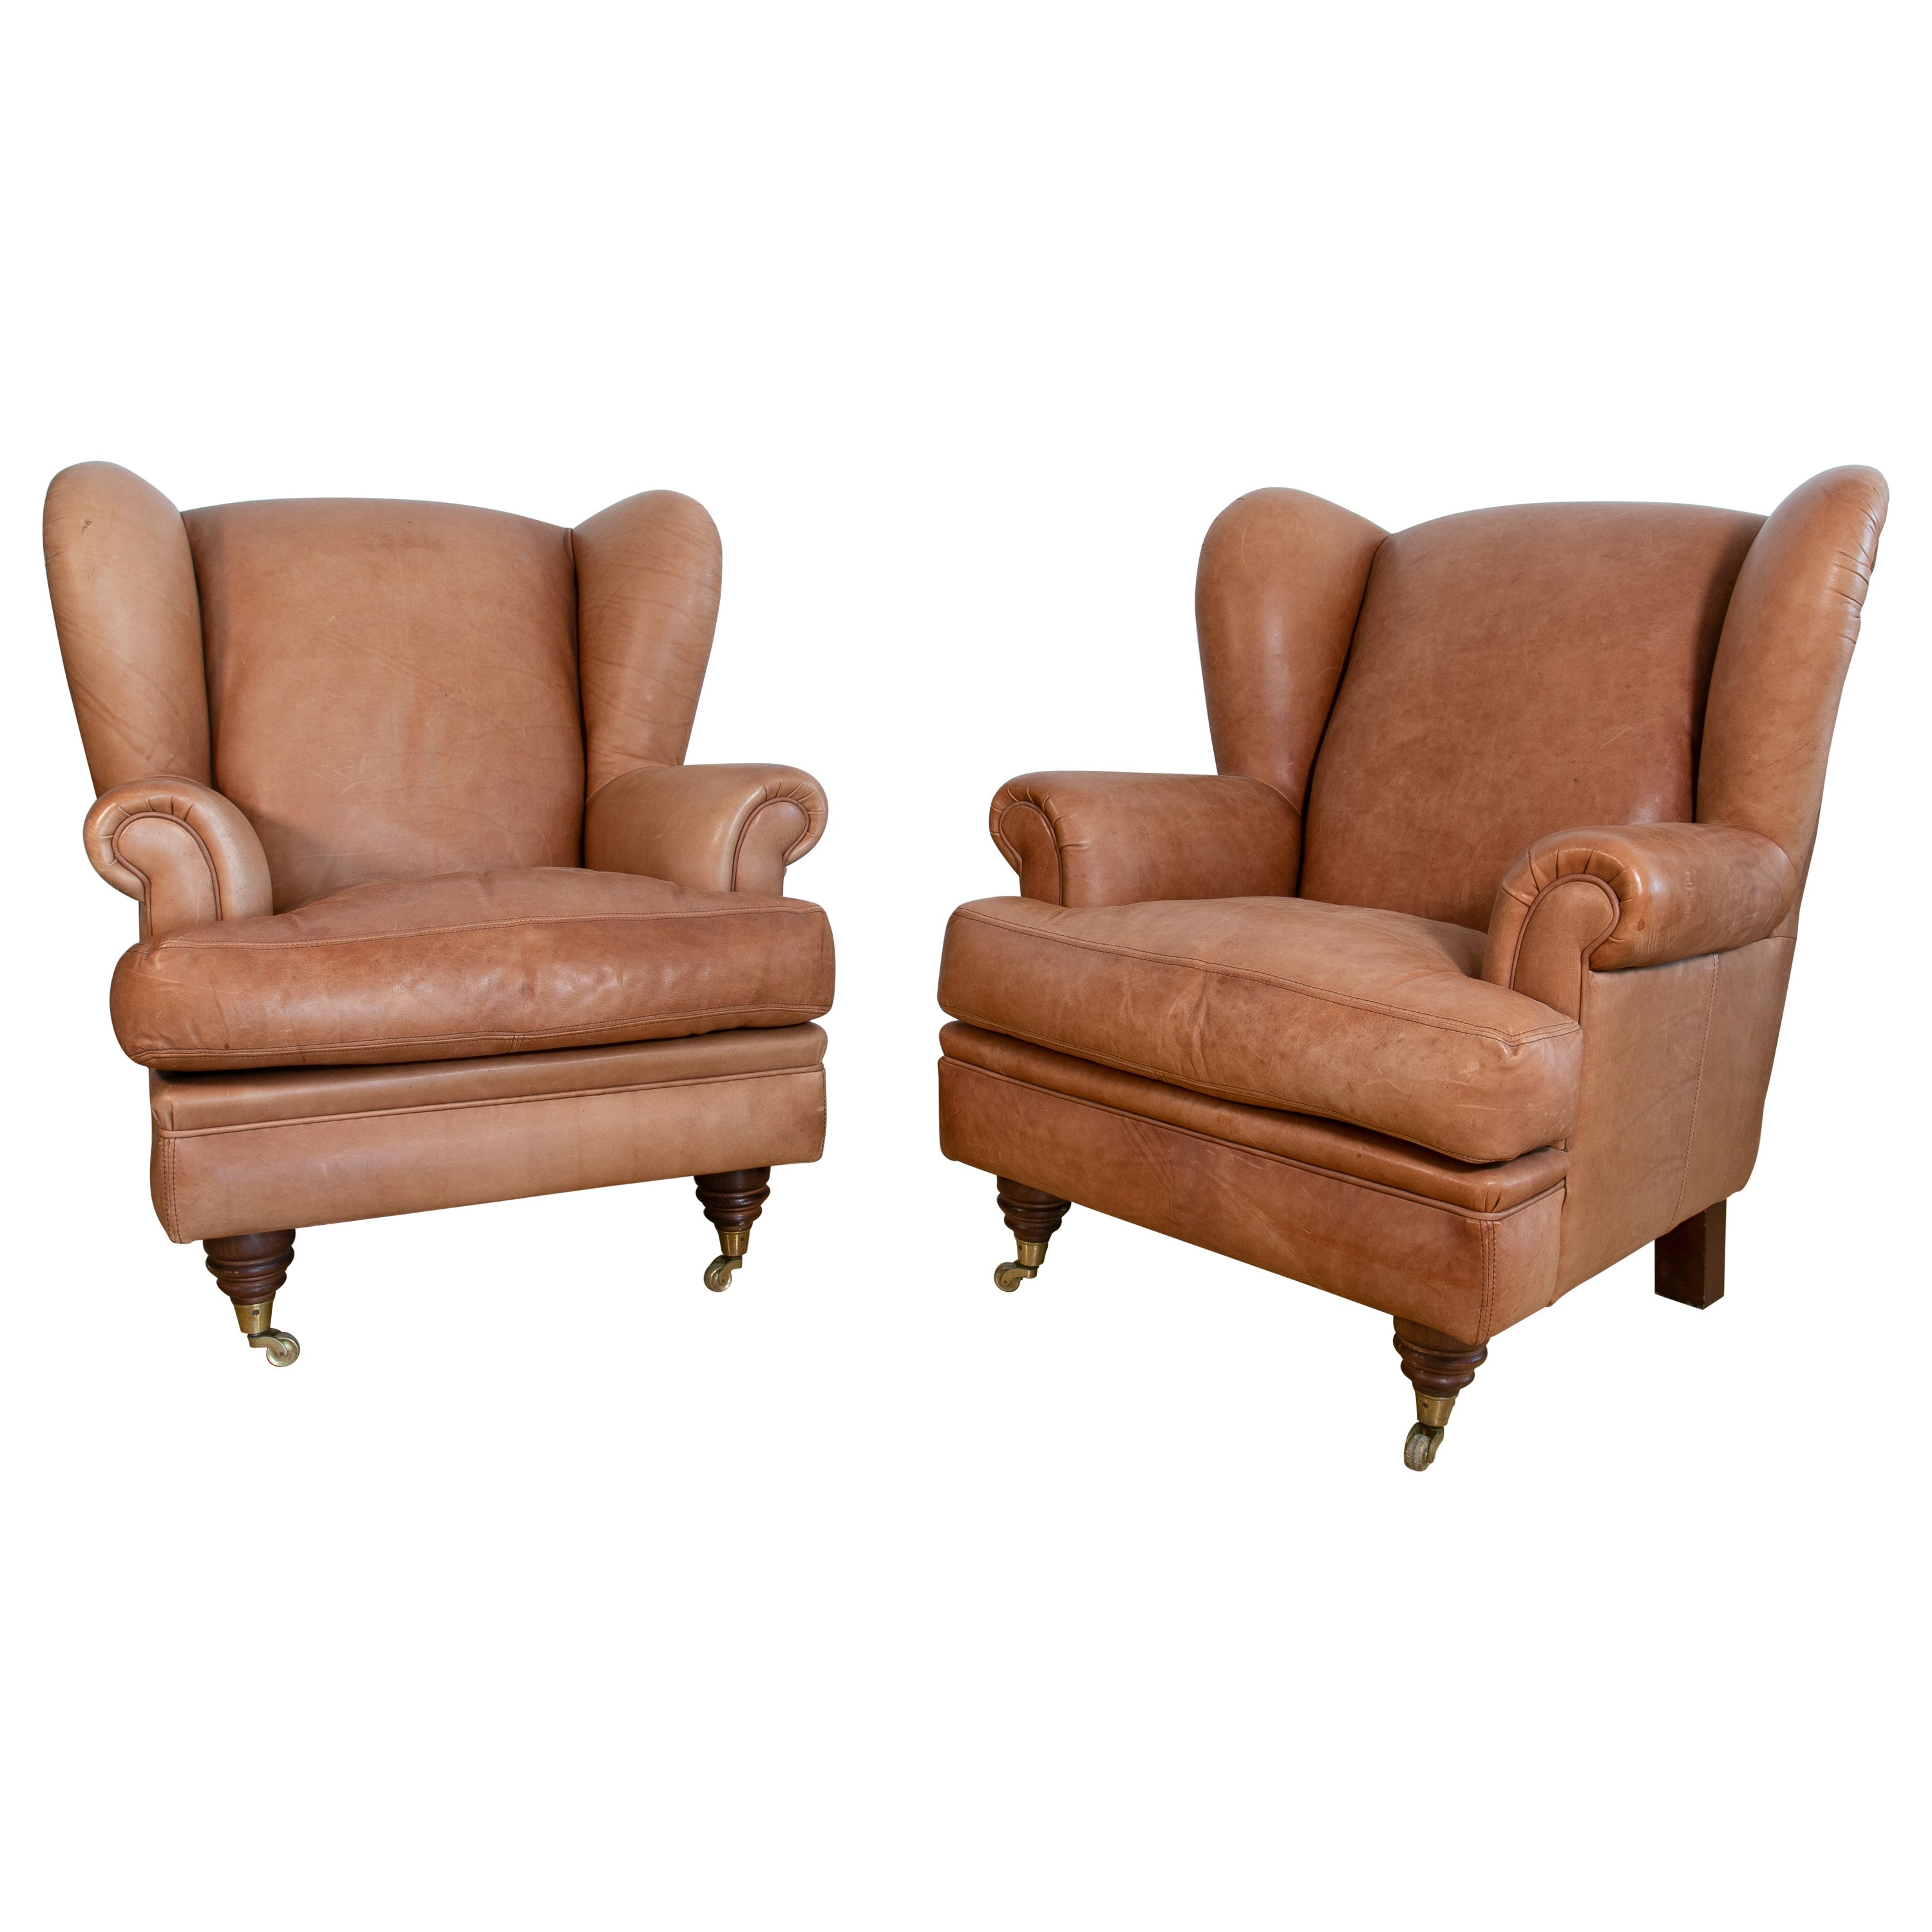 Pair of Brown Leather Armchairs with Wooden Legs and Brass Wheels For Sale